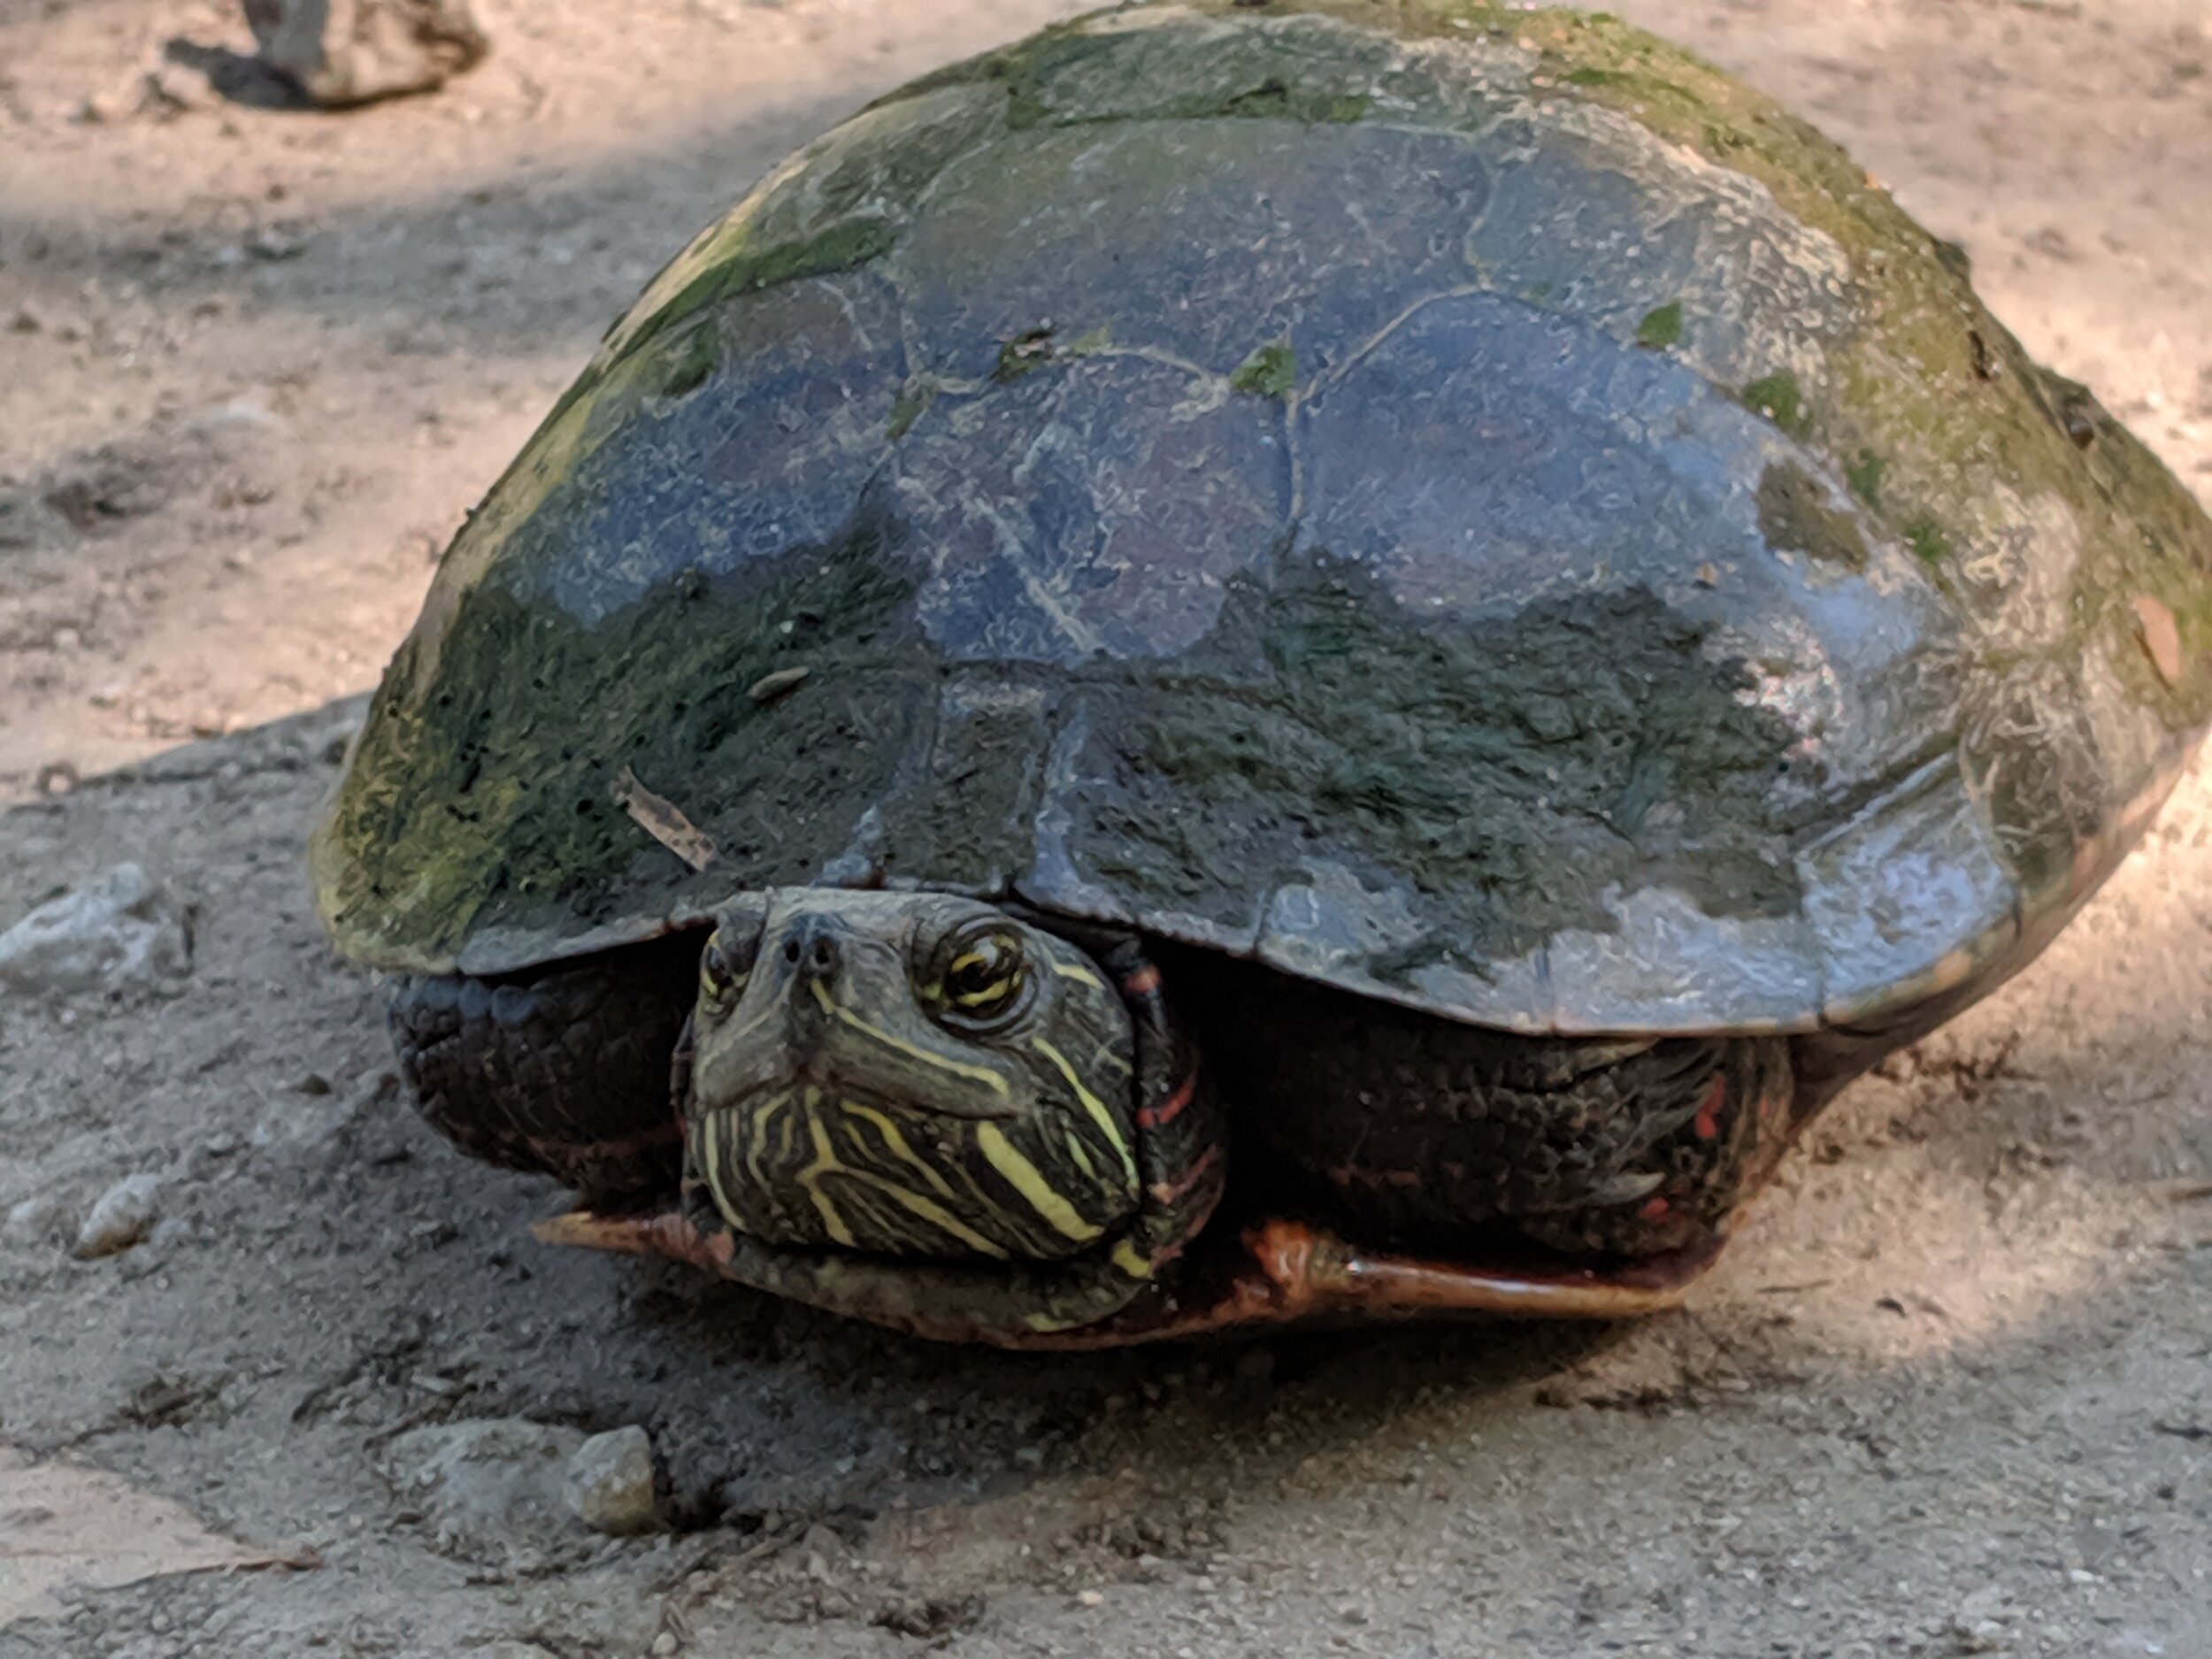 Turtle on an egg-laying expedition